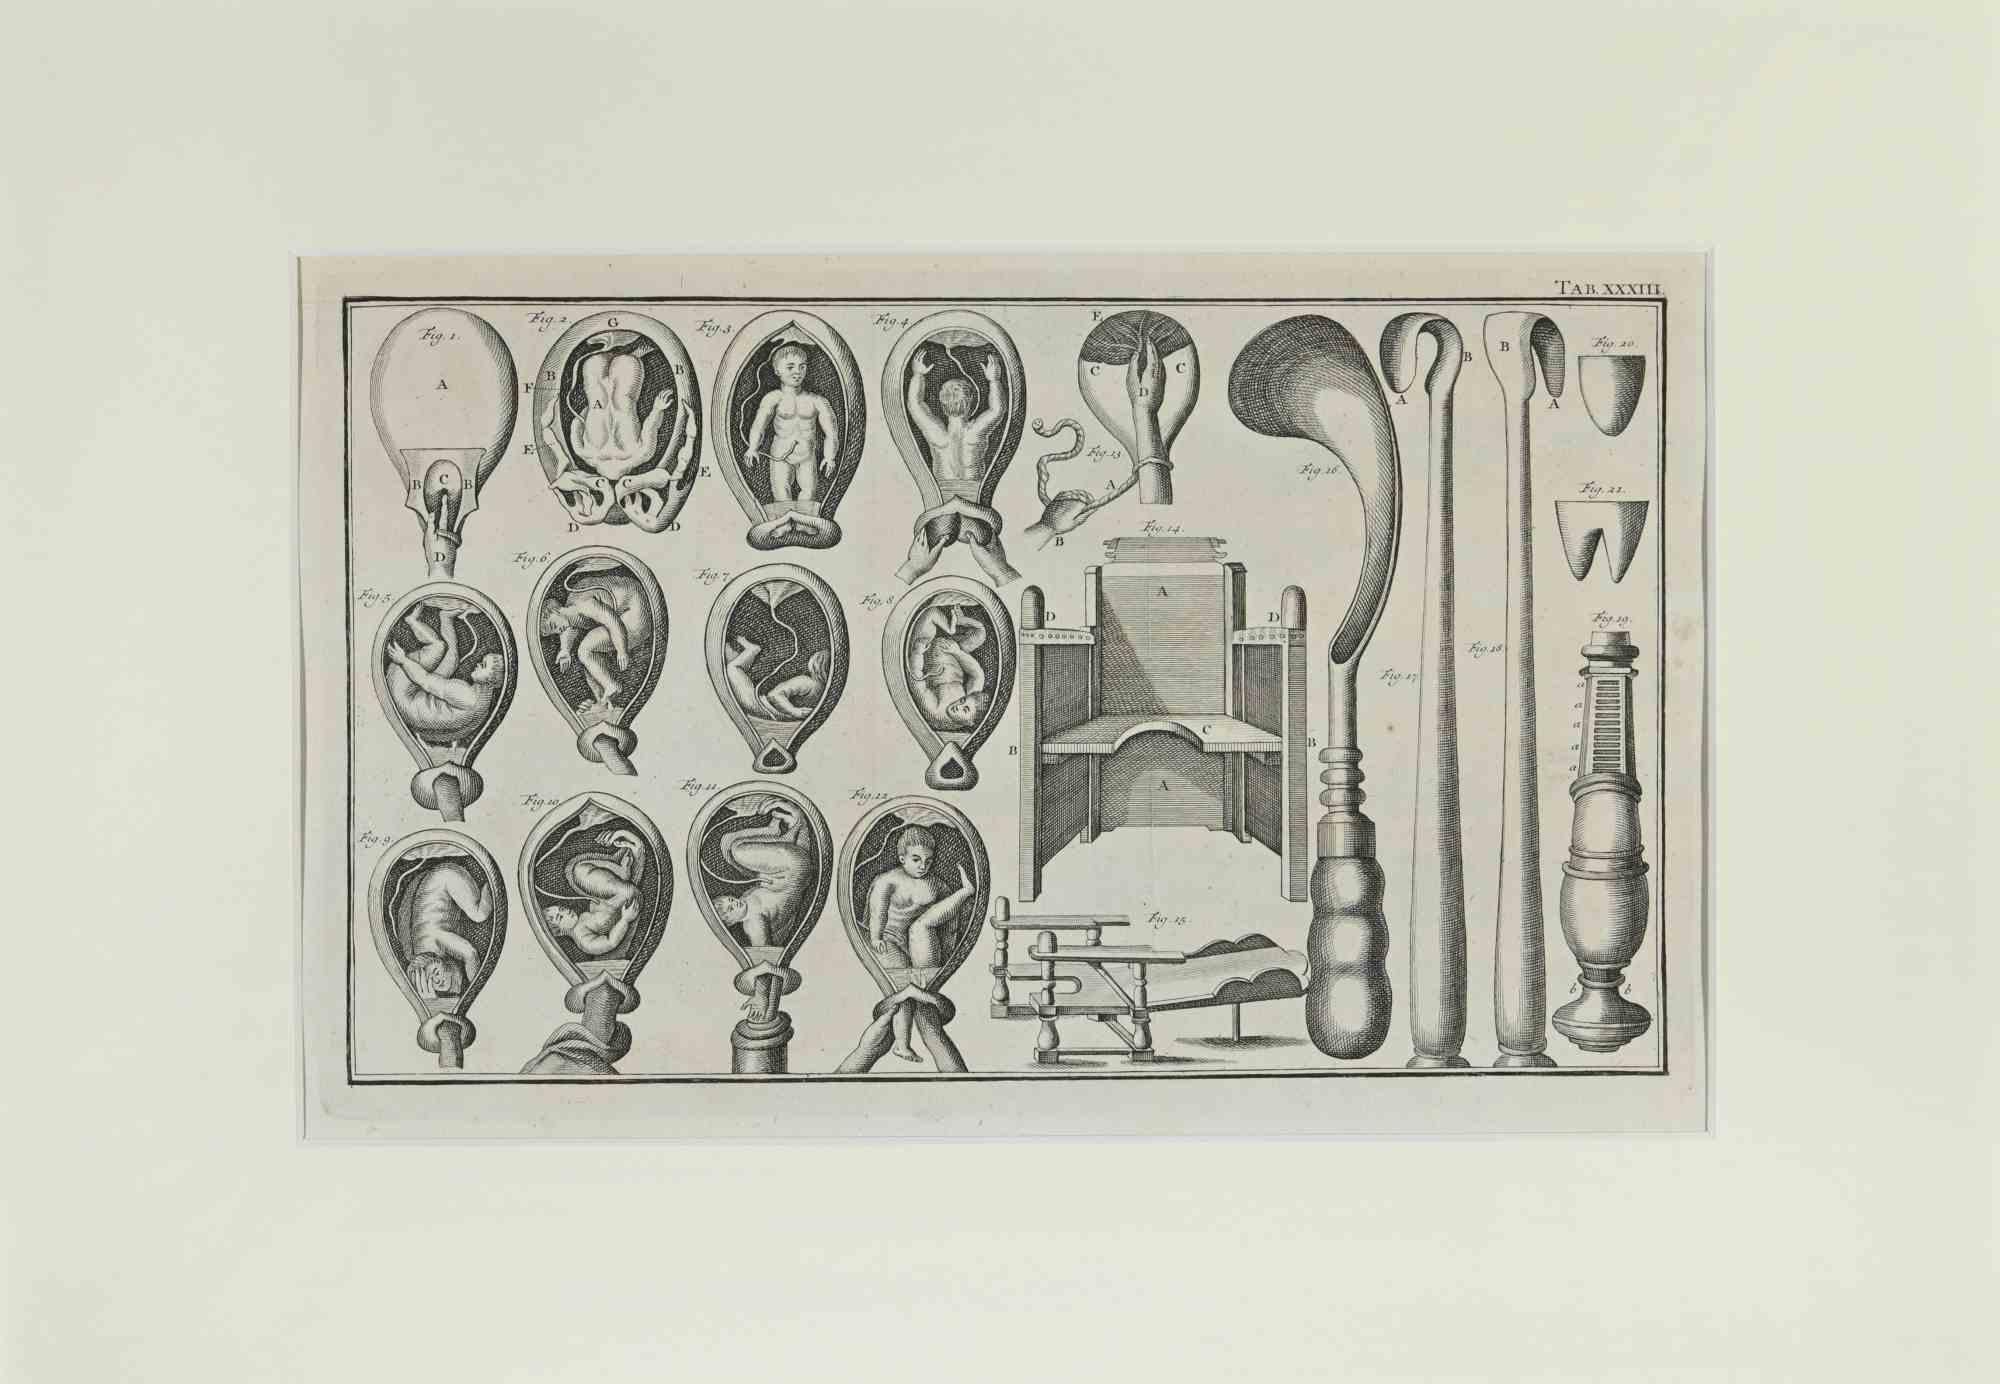 Surgical Instruments s part of the suite realized by Lorenz Heister in the series of Institutiones Chirurgicae, Amsterdam, Janssonius-Waesberg, 1750.

Etching on paper.

The work belongs to the Latin edition of the famous work by the founder of